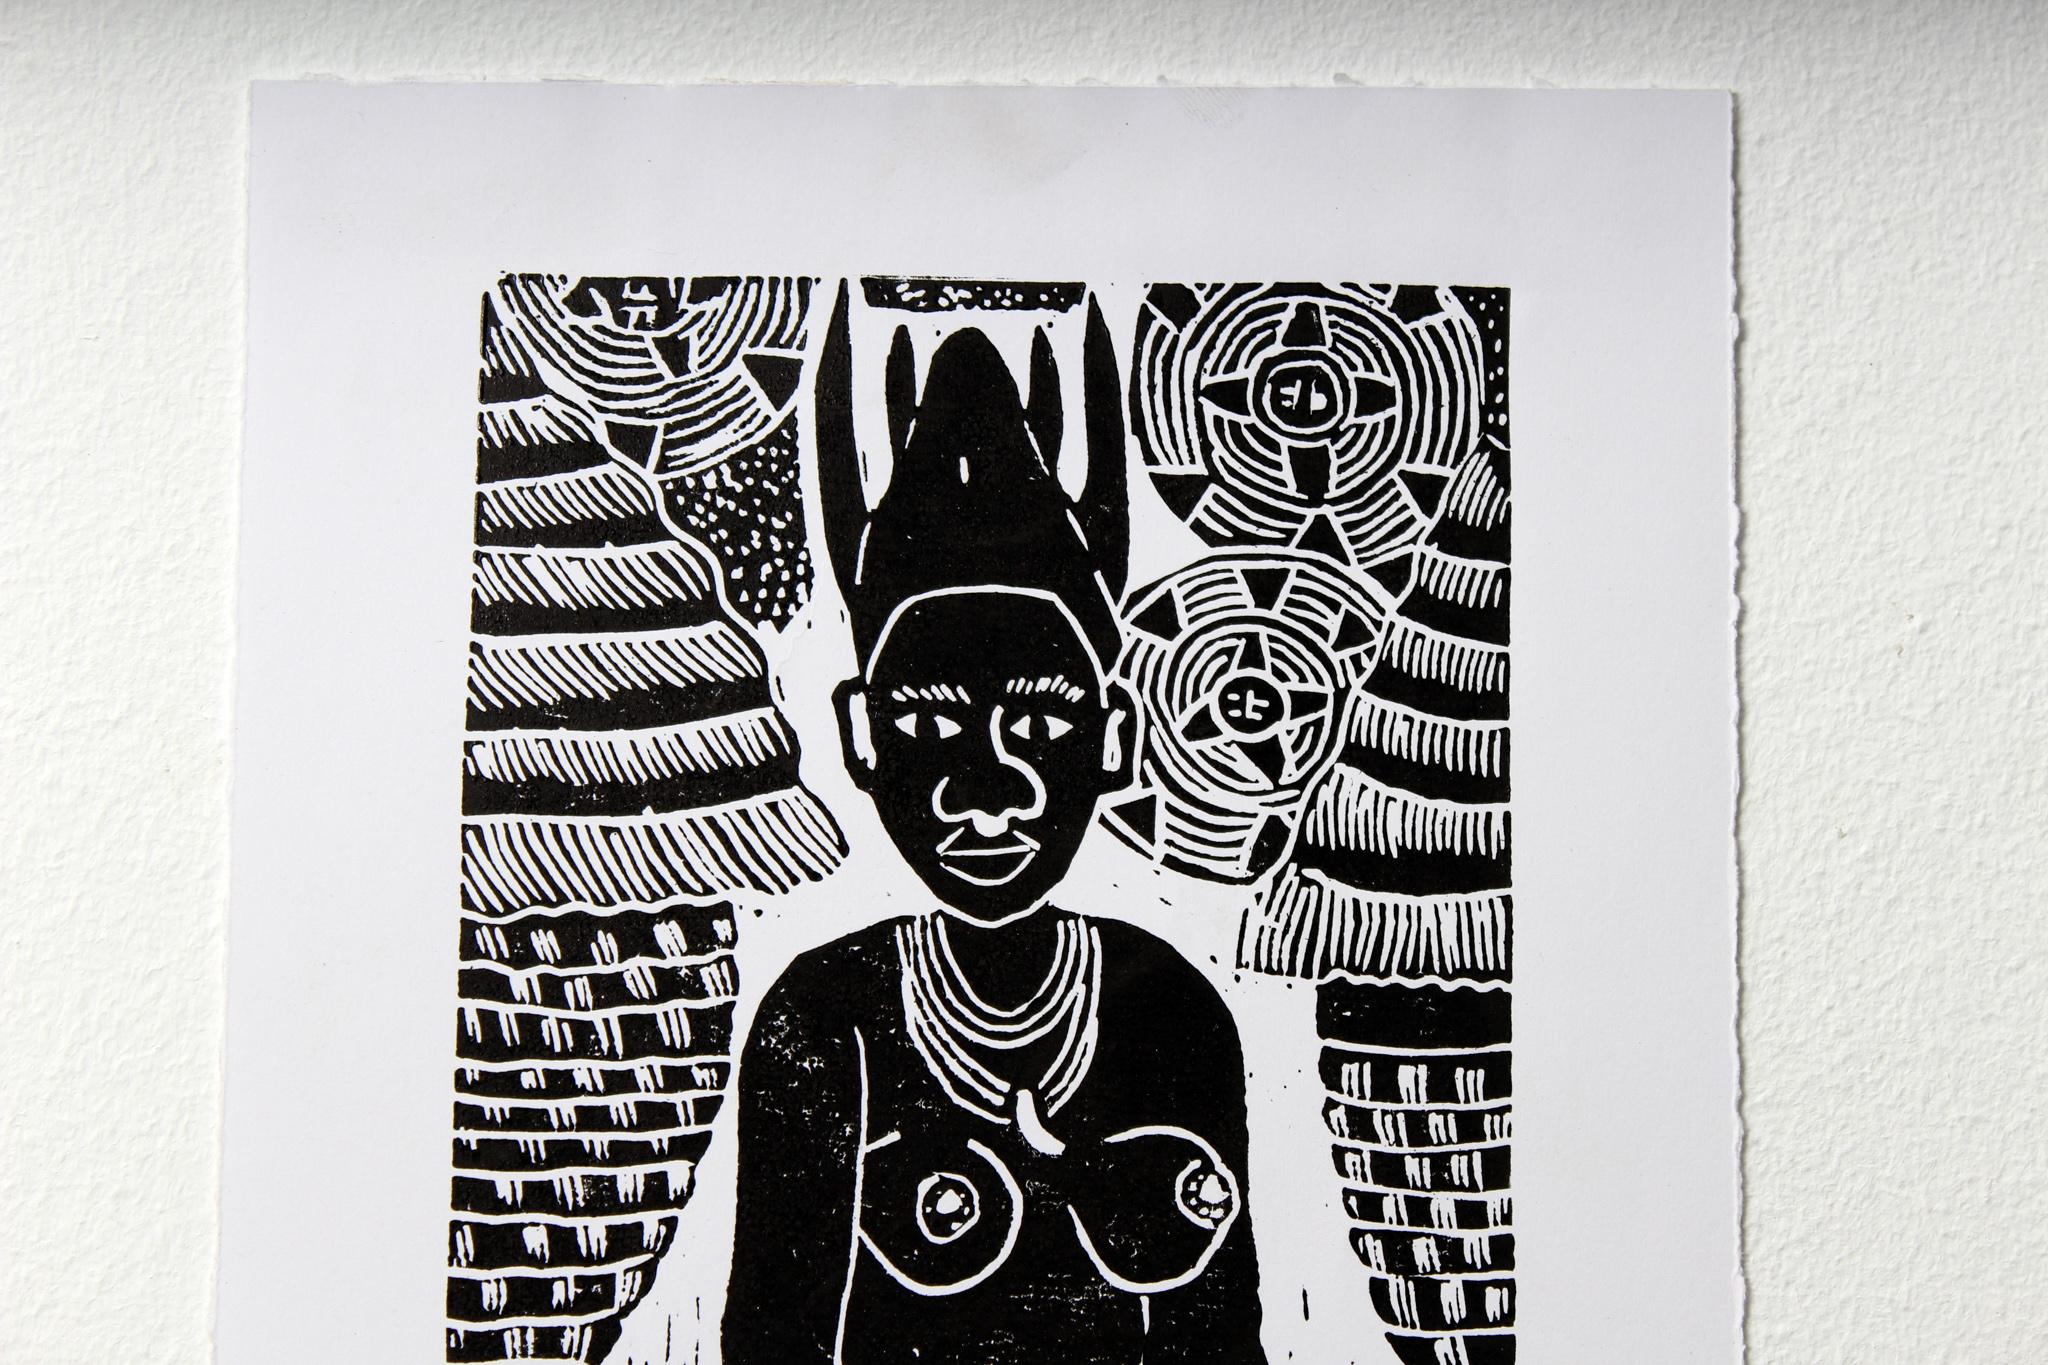 I am sifting mahangu, Linoleum block prints on paper.

Elia Shiwoohamba was born in 1981 in Windhoek, Namibia. He graduated from the John Muafangejo Art Centre in Windhoek in 2006. Specialising in printmaking and sculpture, Shiwoohamba works as a